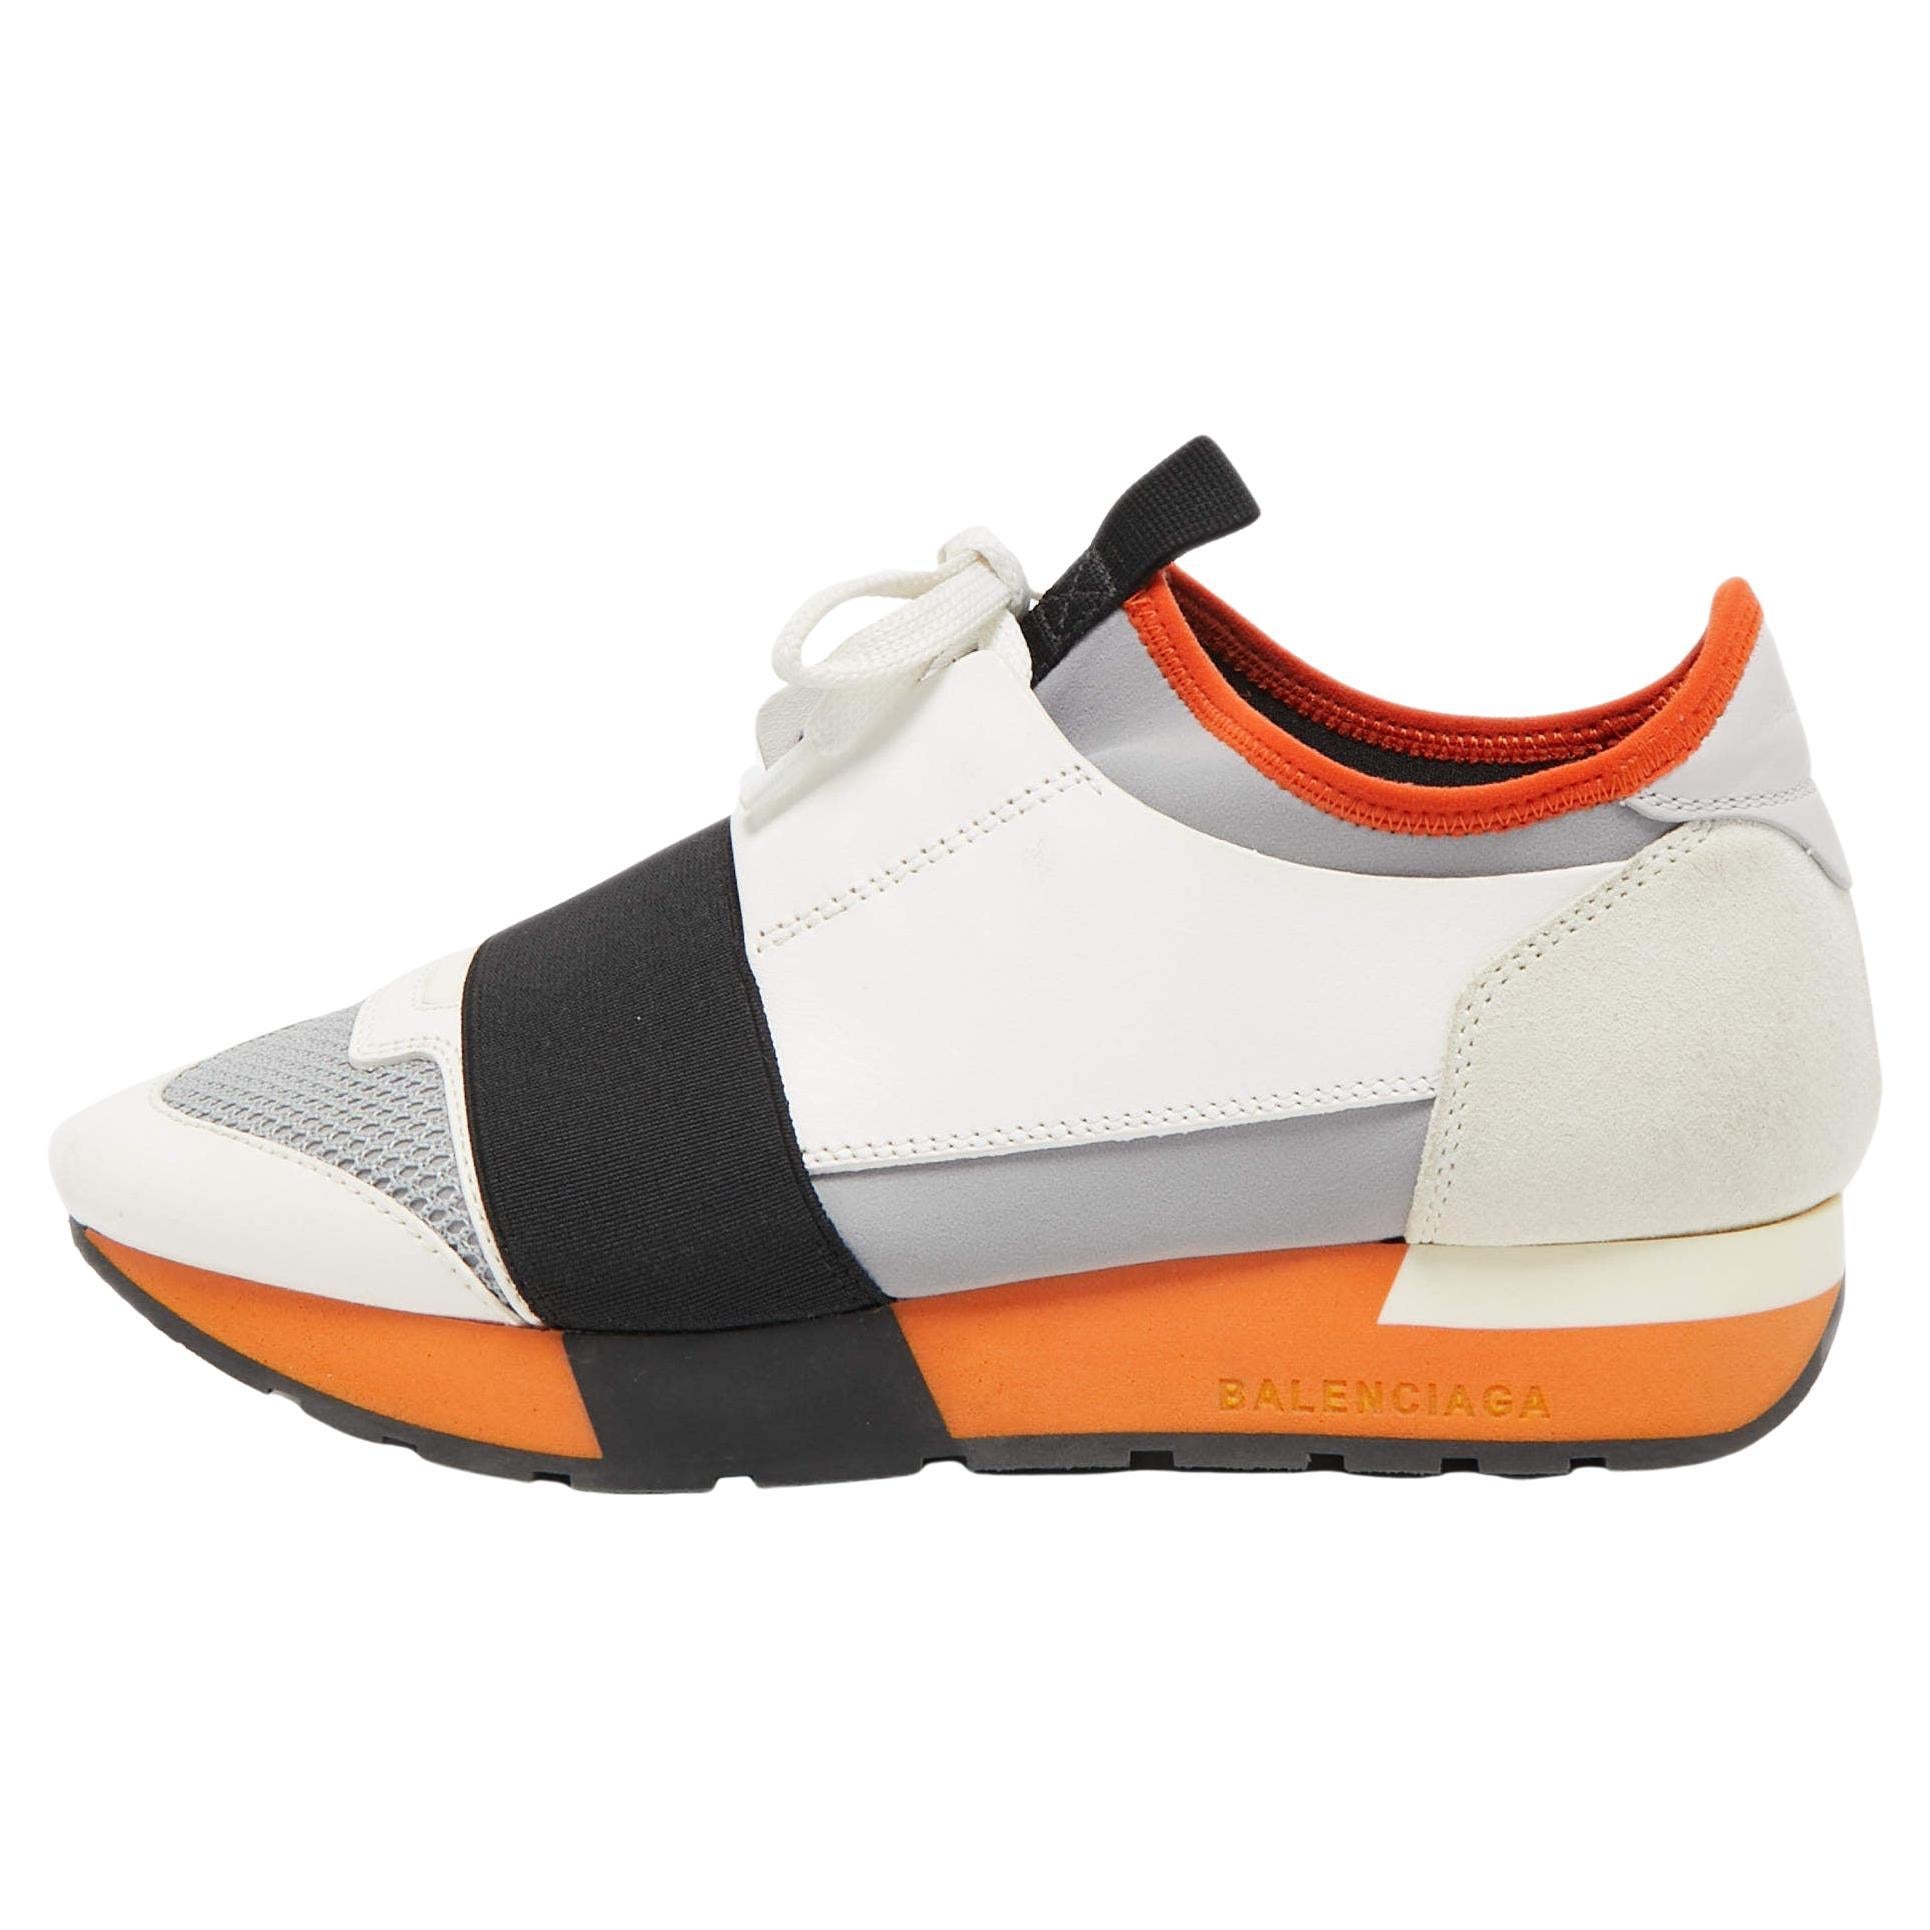 Balenciaga Tricolor Leather and Mesh Race Runner Sneakers Size 36 For Sale